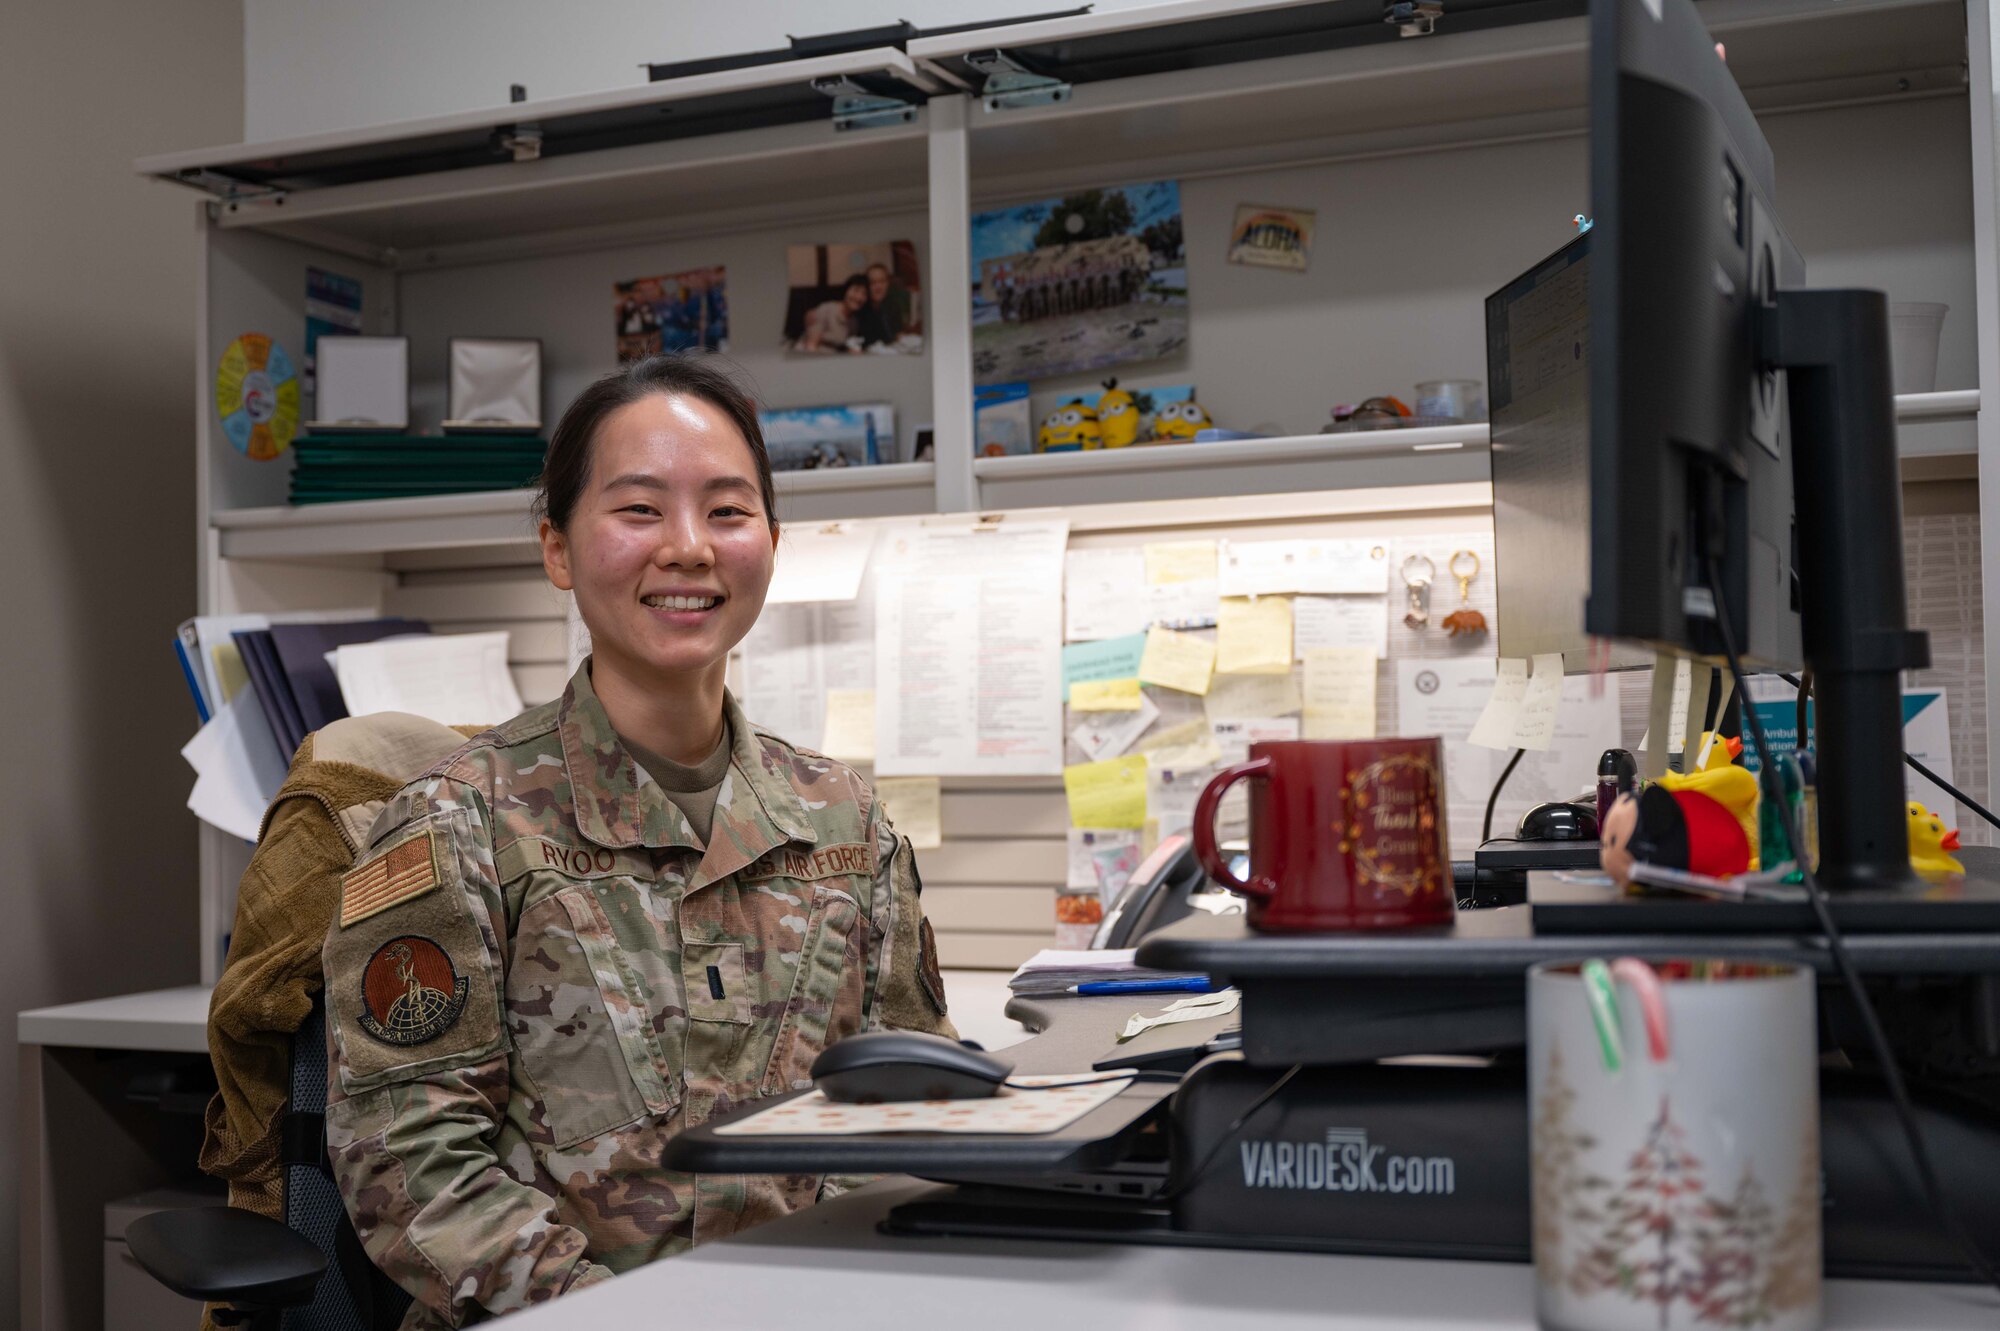 1st Lt. Ryoo poses for a photo at her desk.